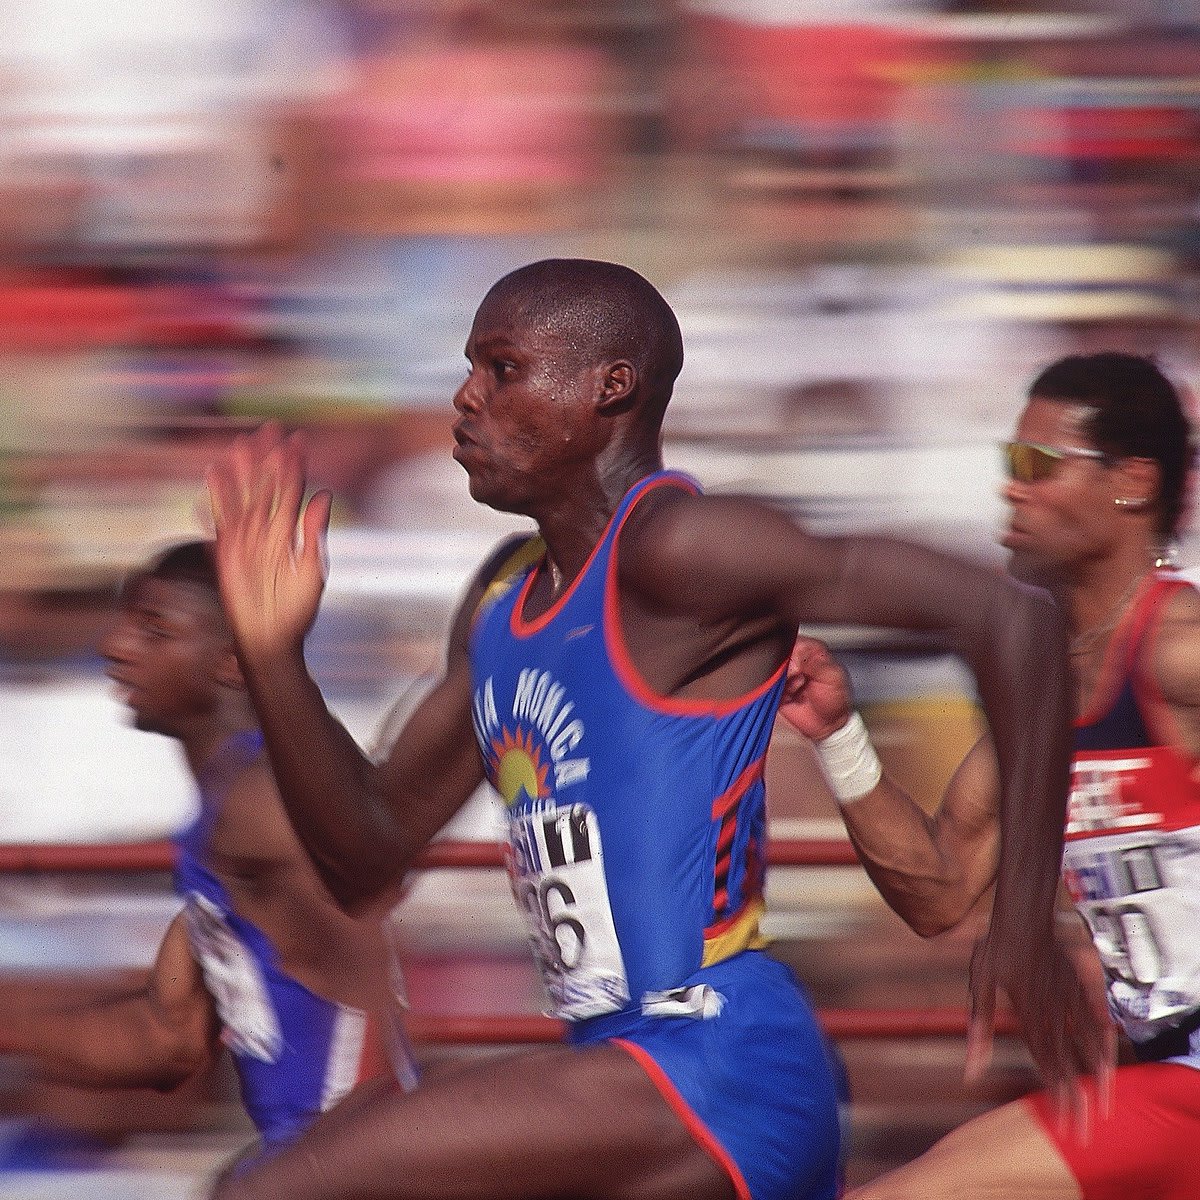 @Carl_Lewis running the 100-meter race at the 1992 U.S. Olympic Trials. He would go on to win 9 Olympic gold medals throughout his career.